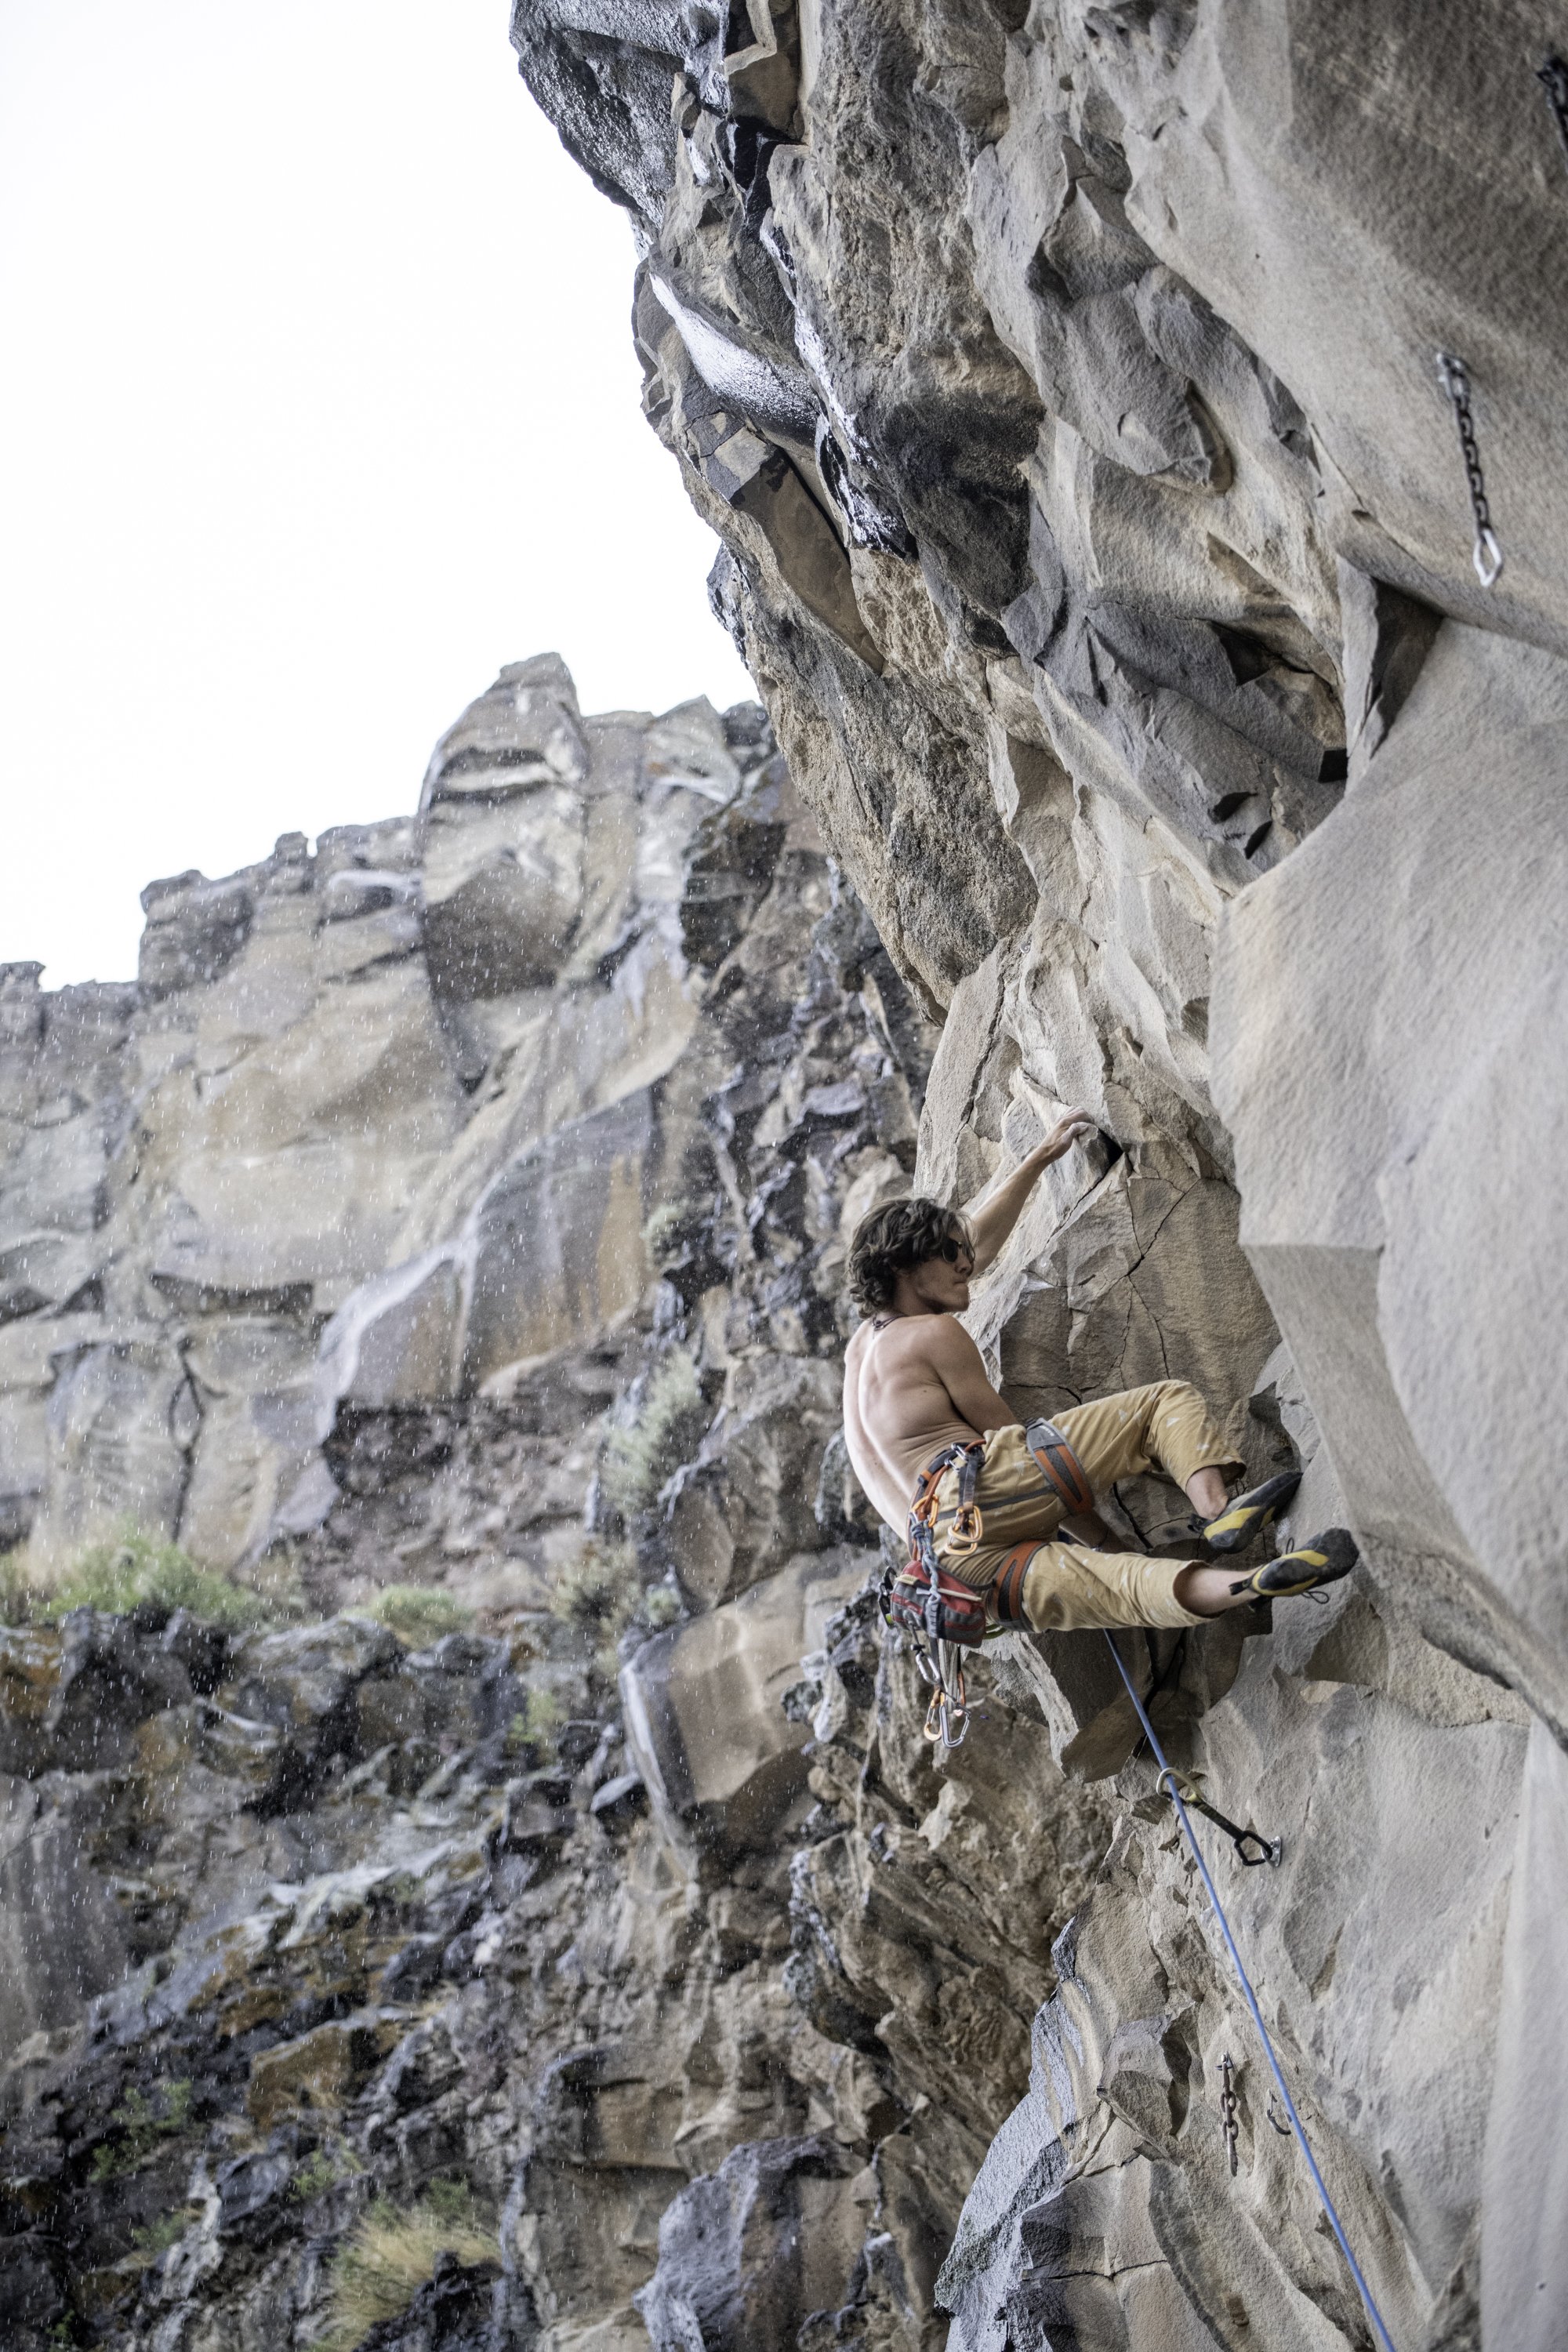  Kyle Higby climbs ‘Horrorscope’, a 5.13a sport route, in Taos, N.M. on June 18, 2022.  